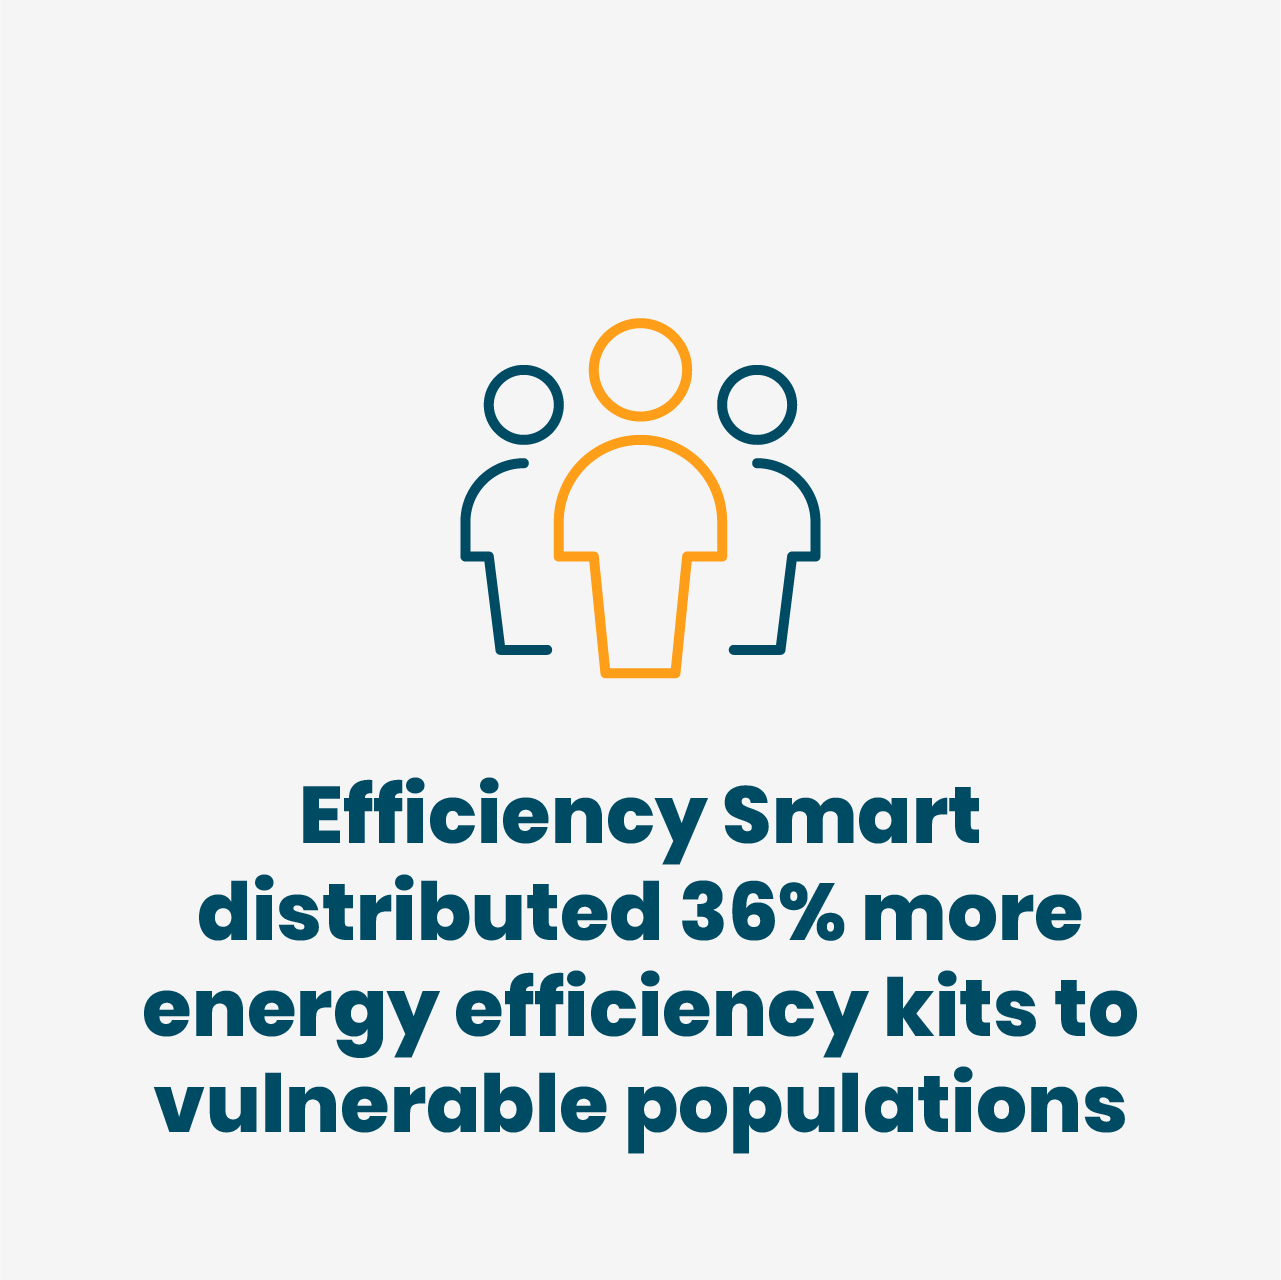 Efficiency Smart distributed 36% more energy efficiency kits to vulnerable populations